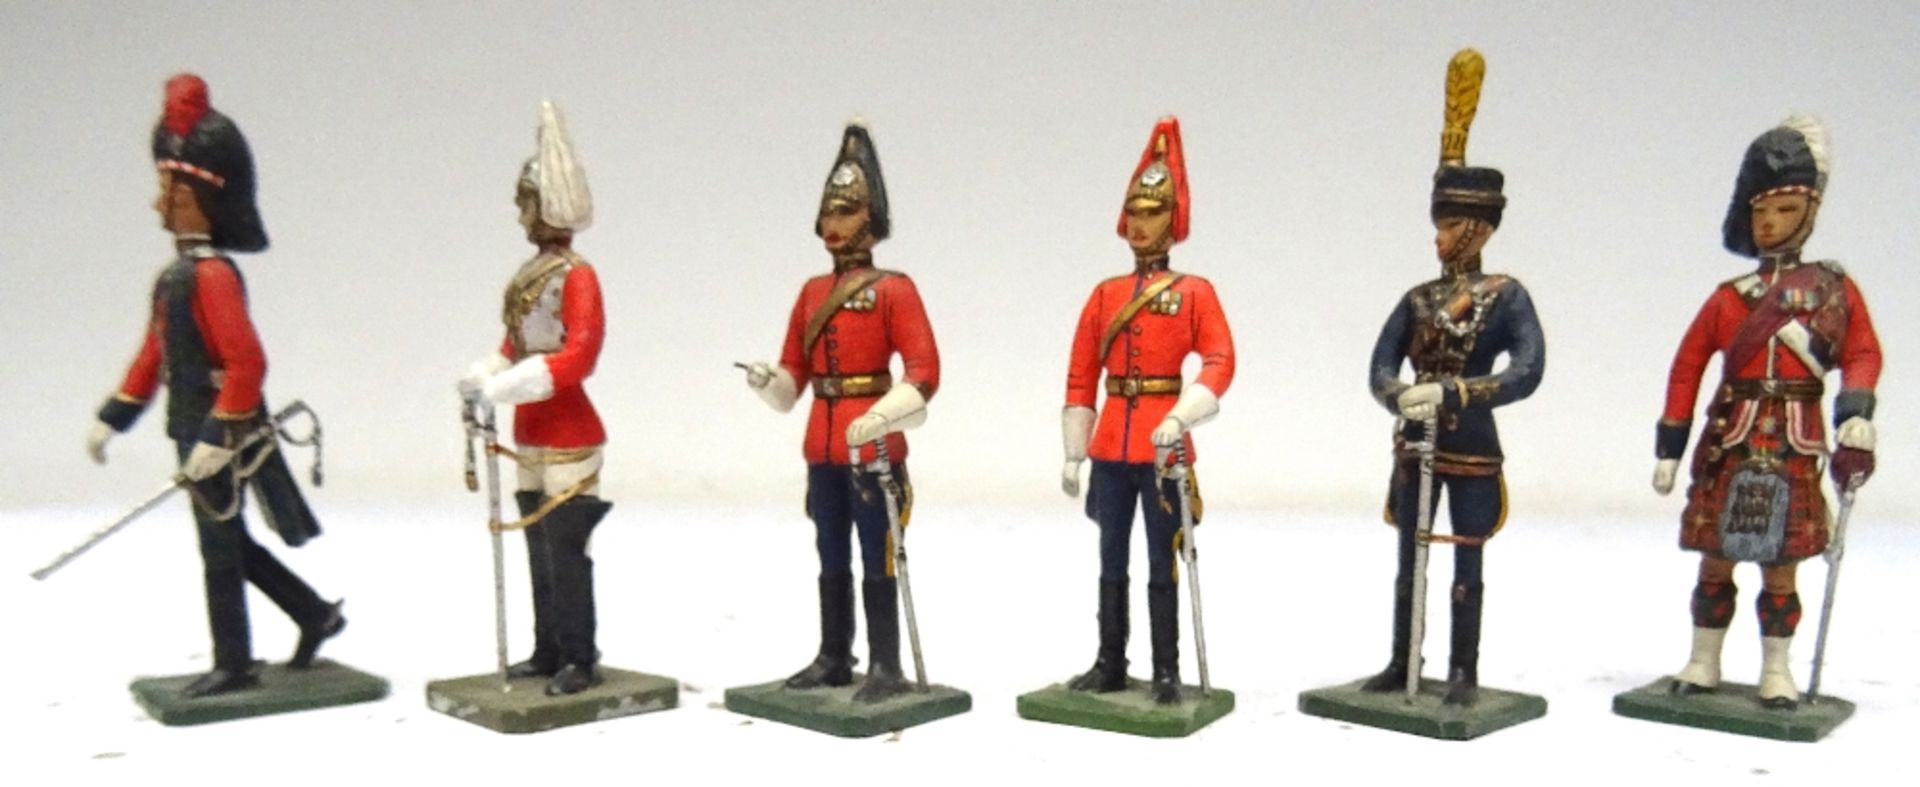 Greenwood and Ball Full Dress Officers of the British Army - Image 2 of 6